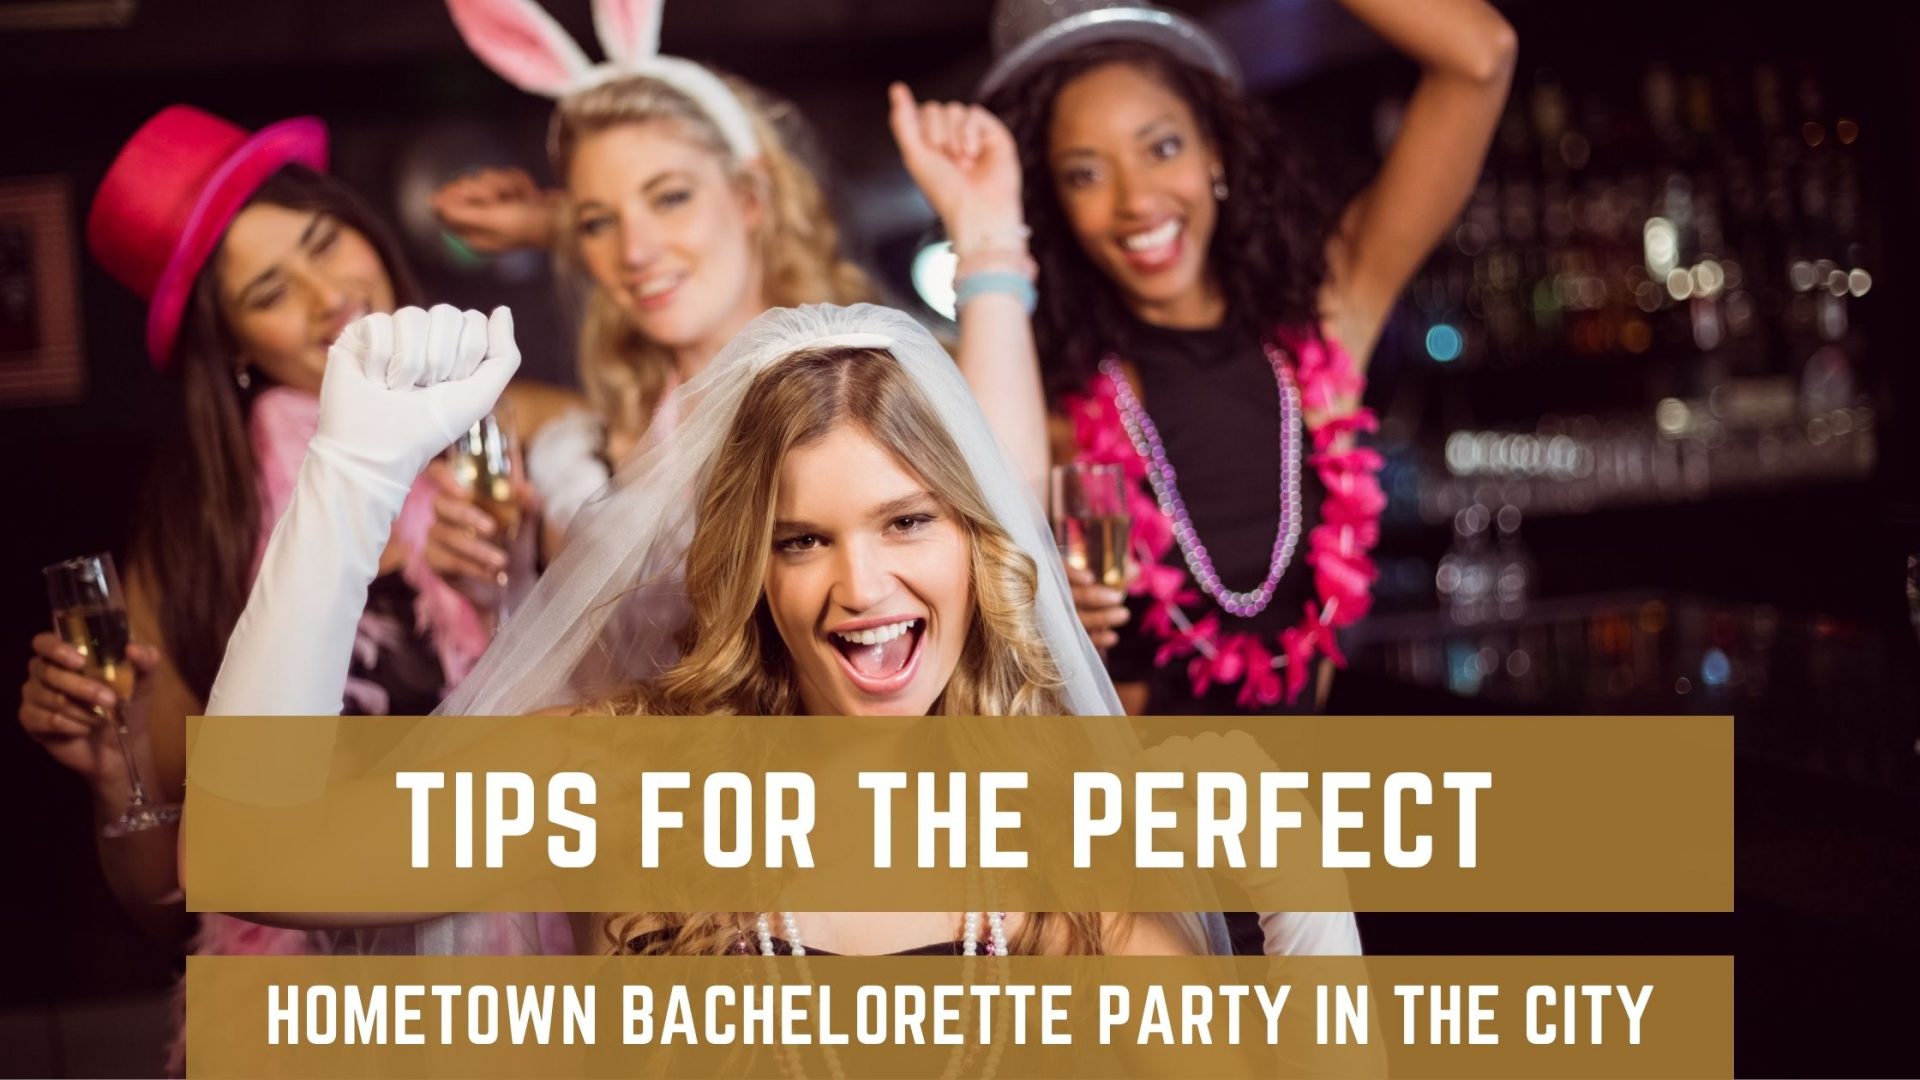 11 Tips for The Perfect Hometown Bachelorette Party in the City